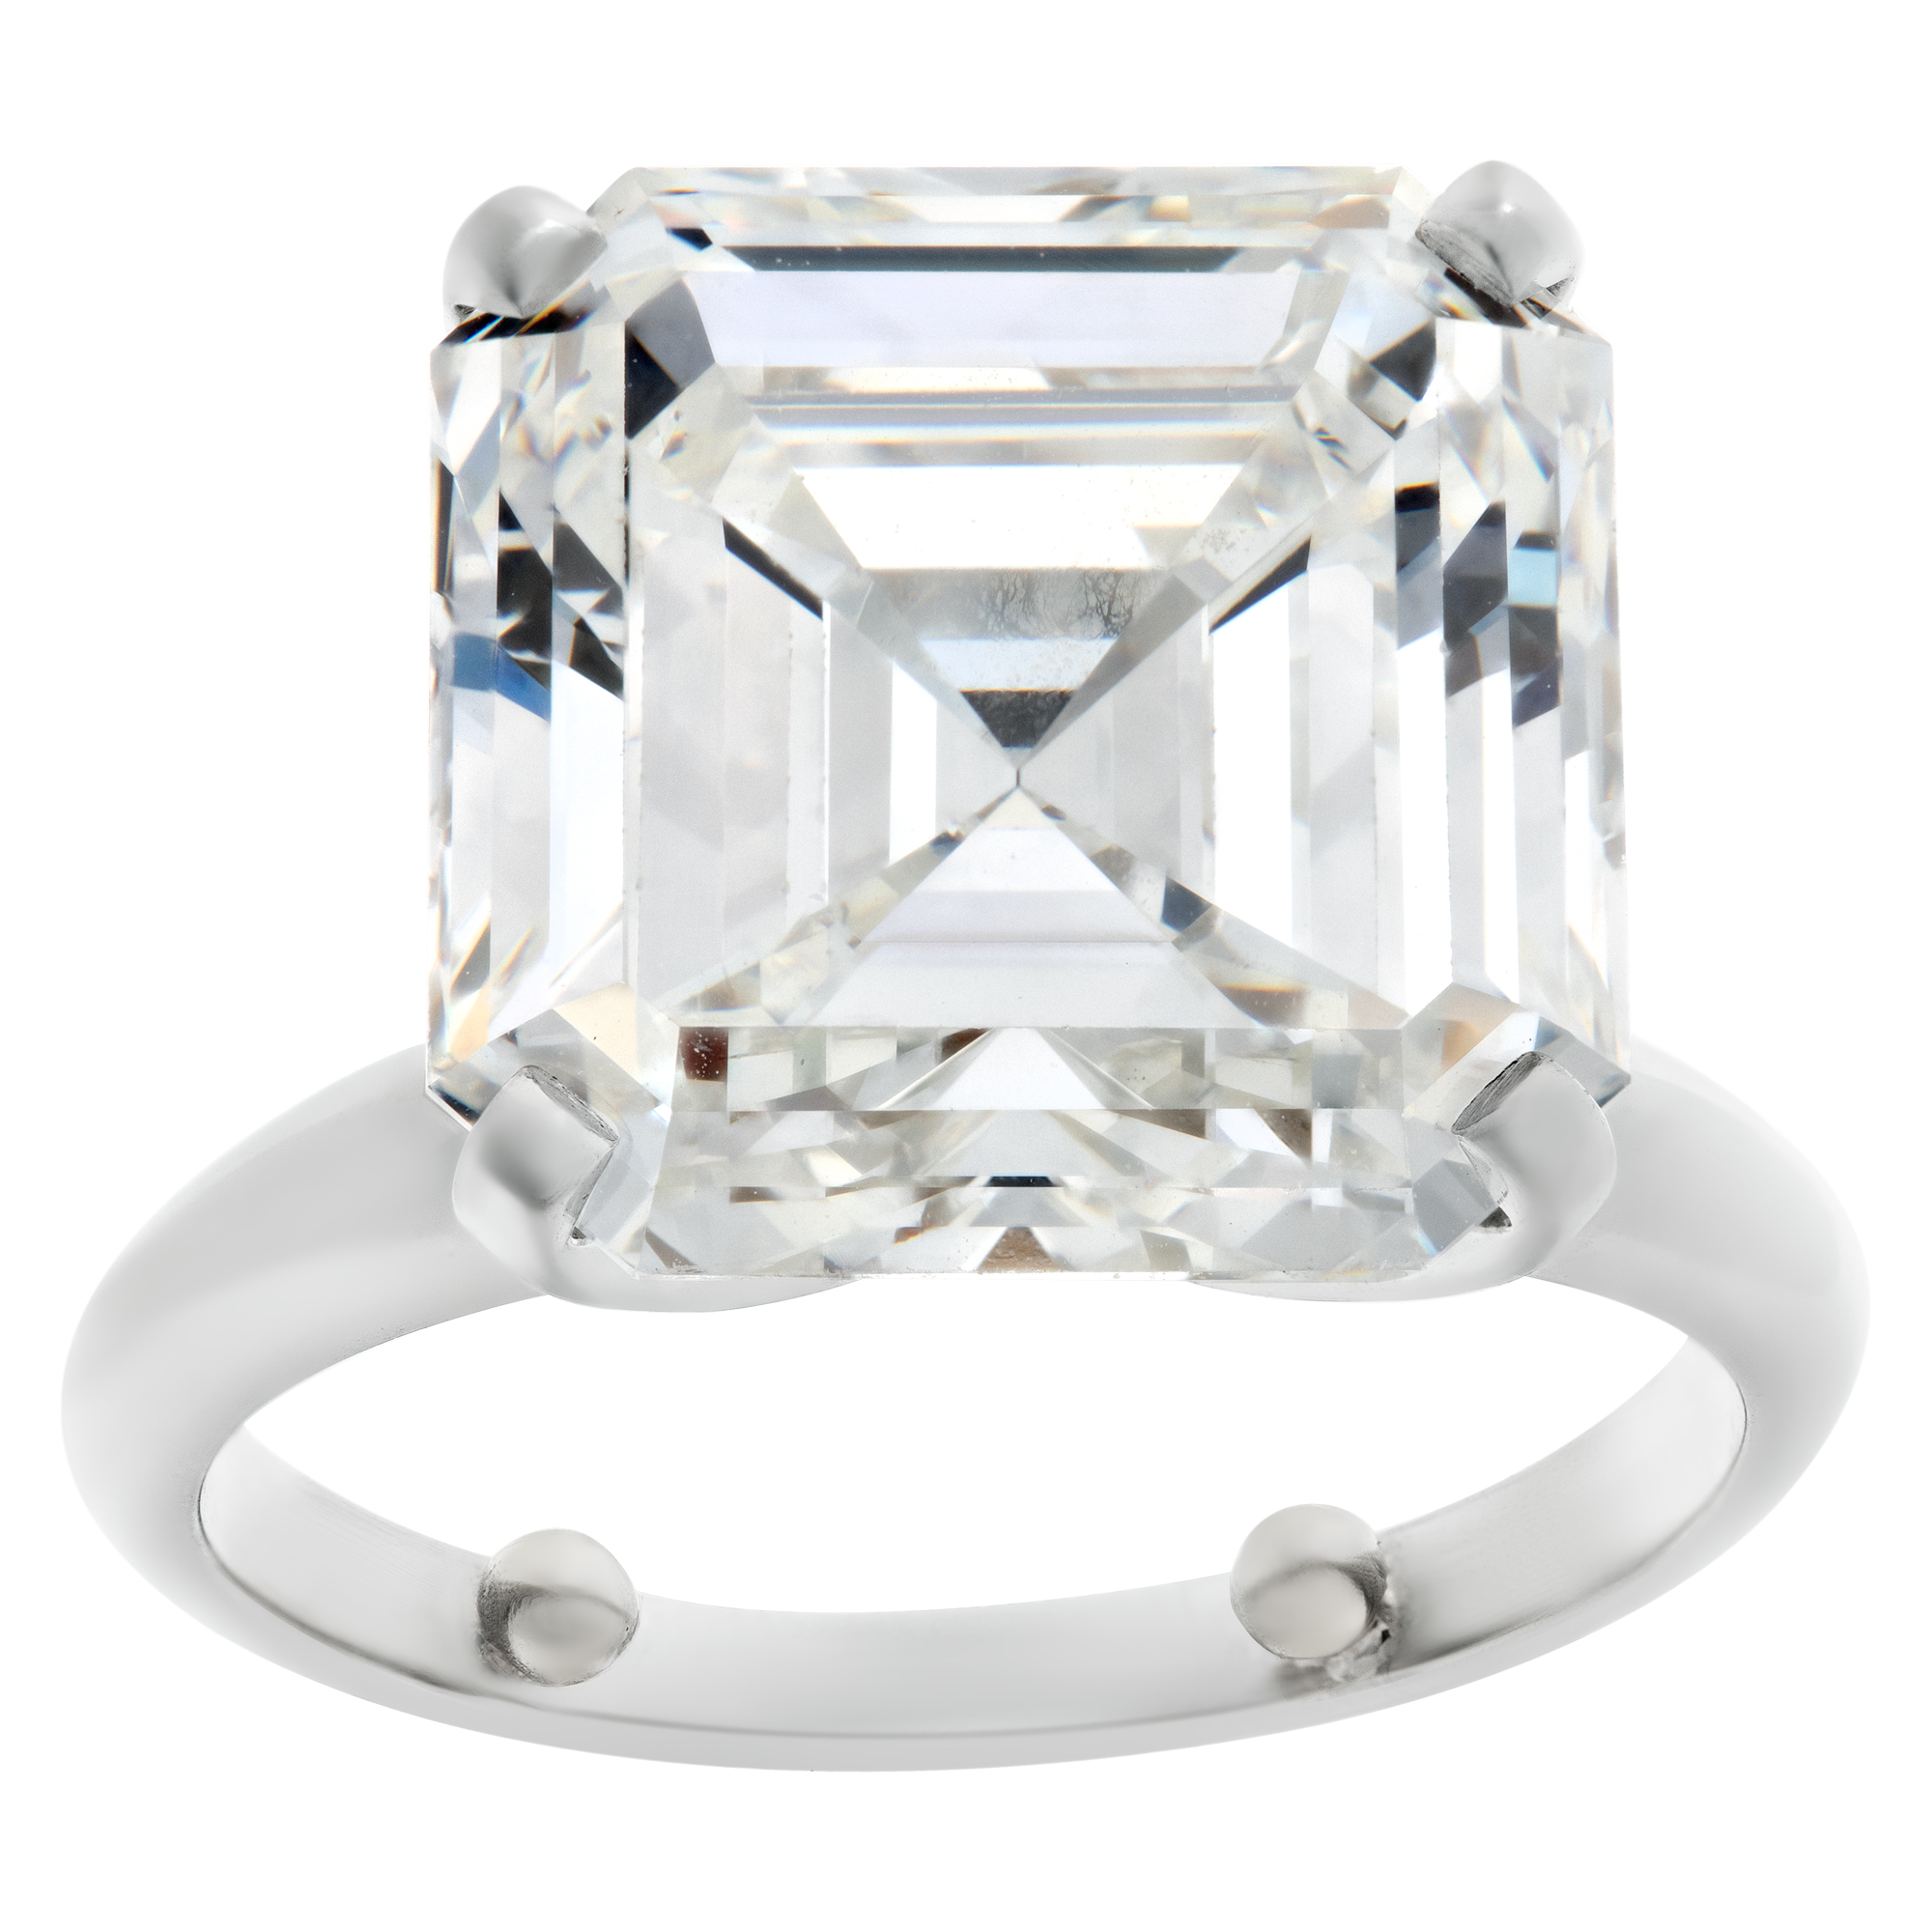 GIA certified asscher cut diamond 9.03 carat (G Color, Vs 1 Clarity) solitaire ring image 1